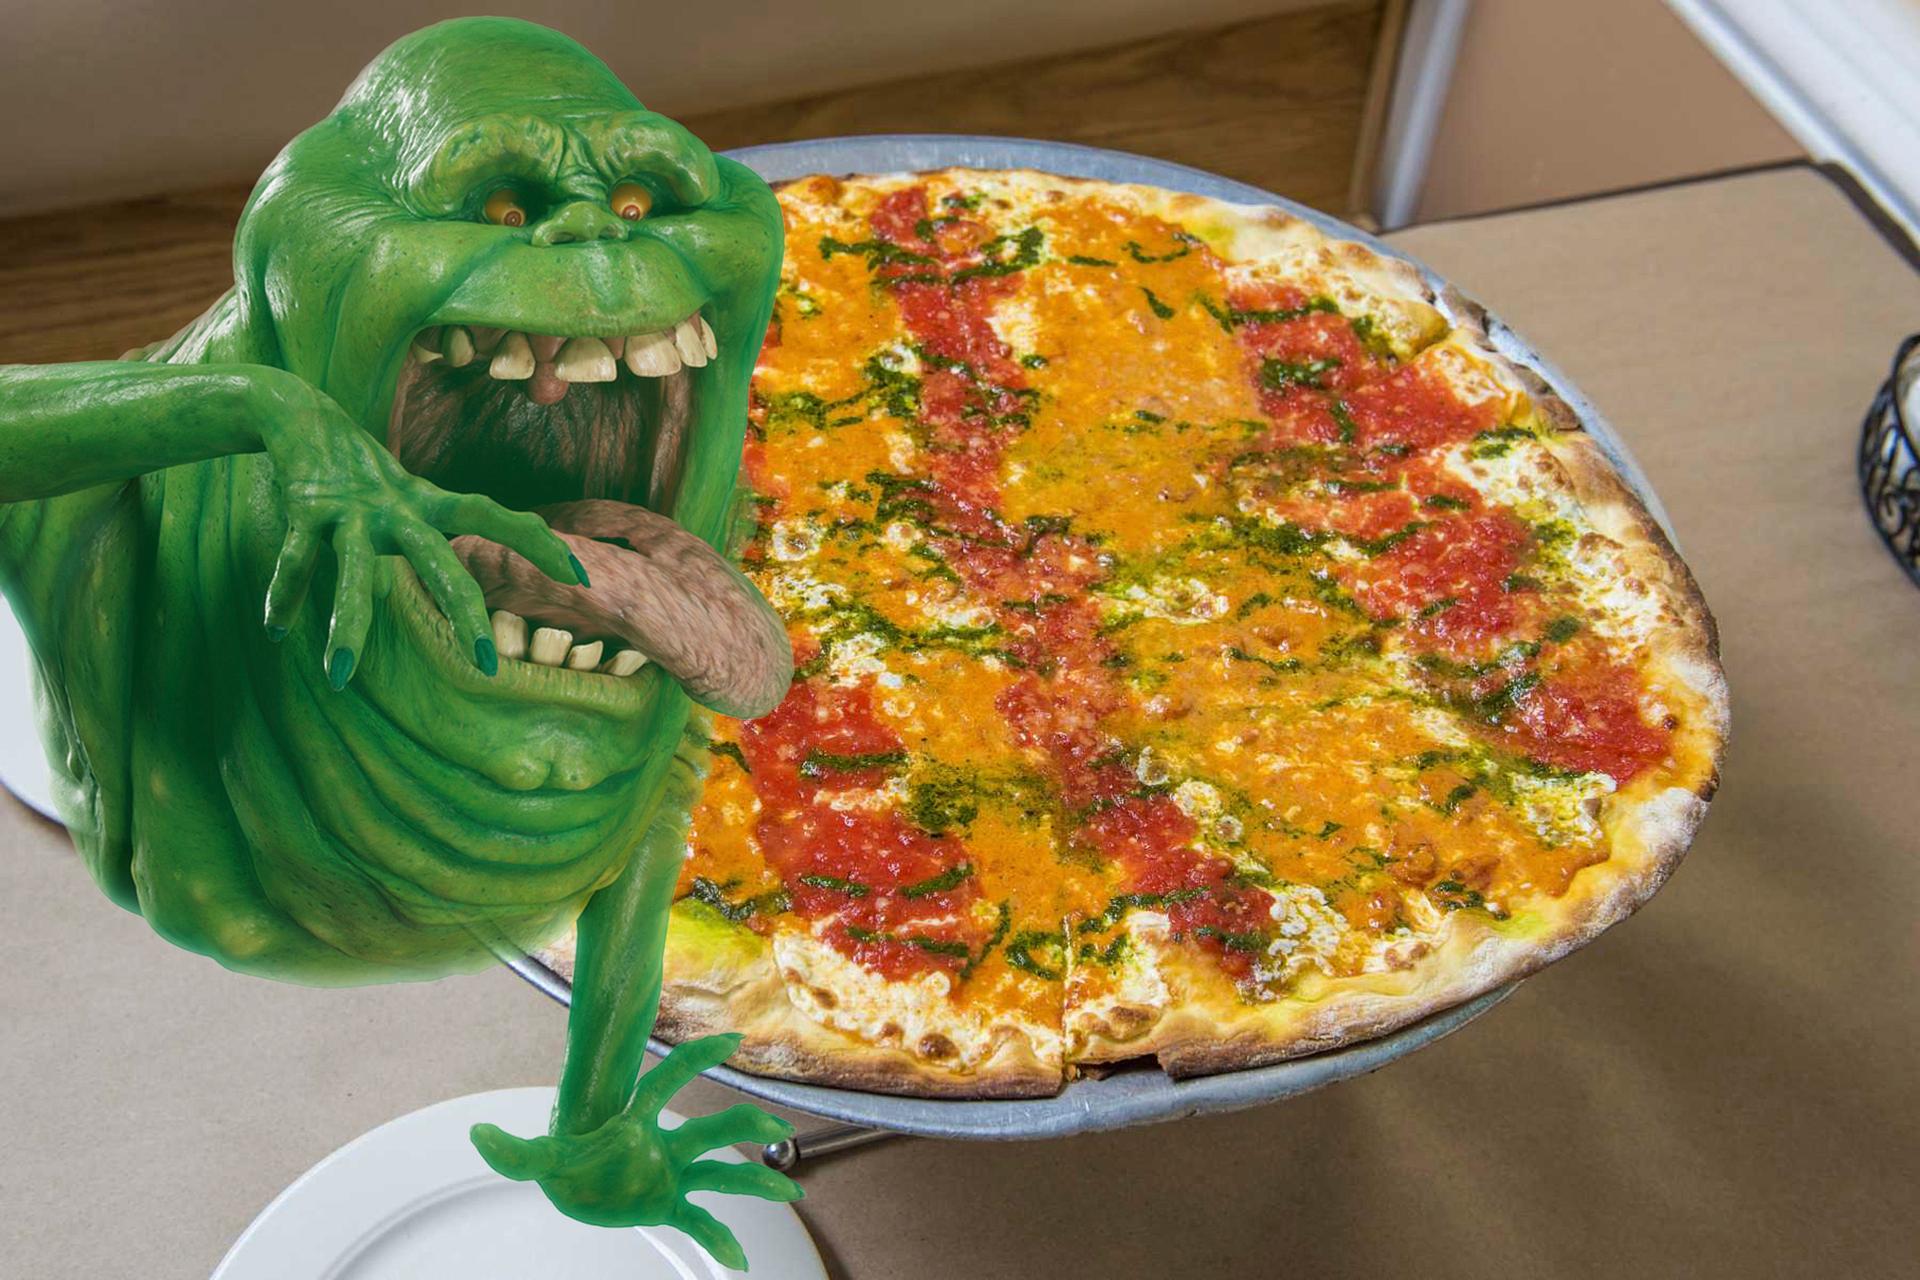 Slimer from Ghostbusters eating pizza at Joe and Pats